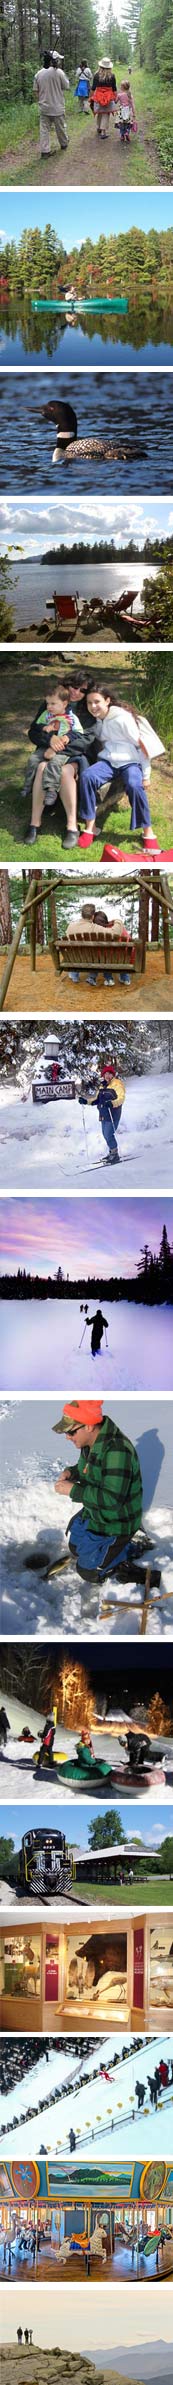 Adirondack Birding Fly Fishing, Boating  Attractions Ski Jouring Cross Country Skiing Snowshoeing